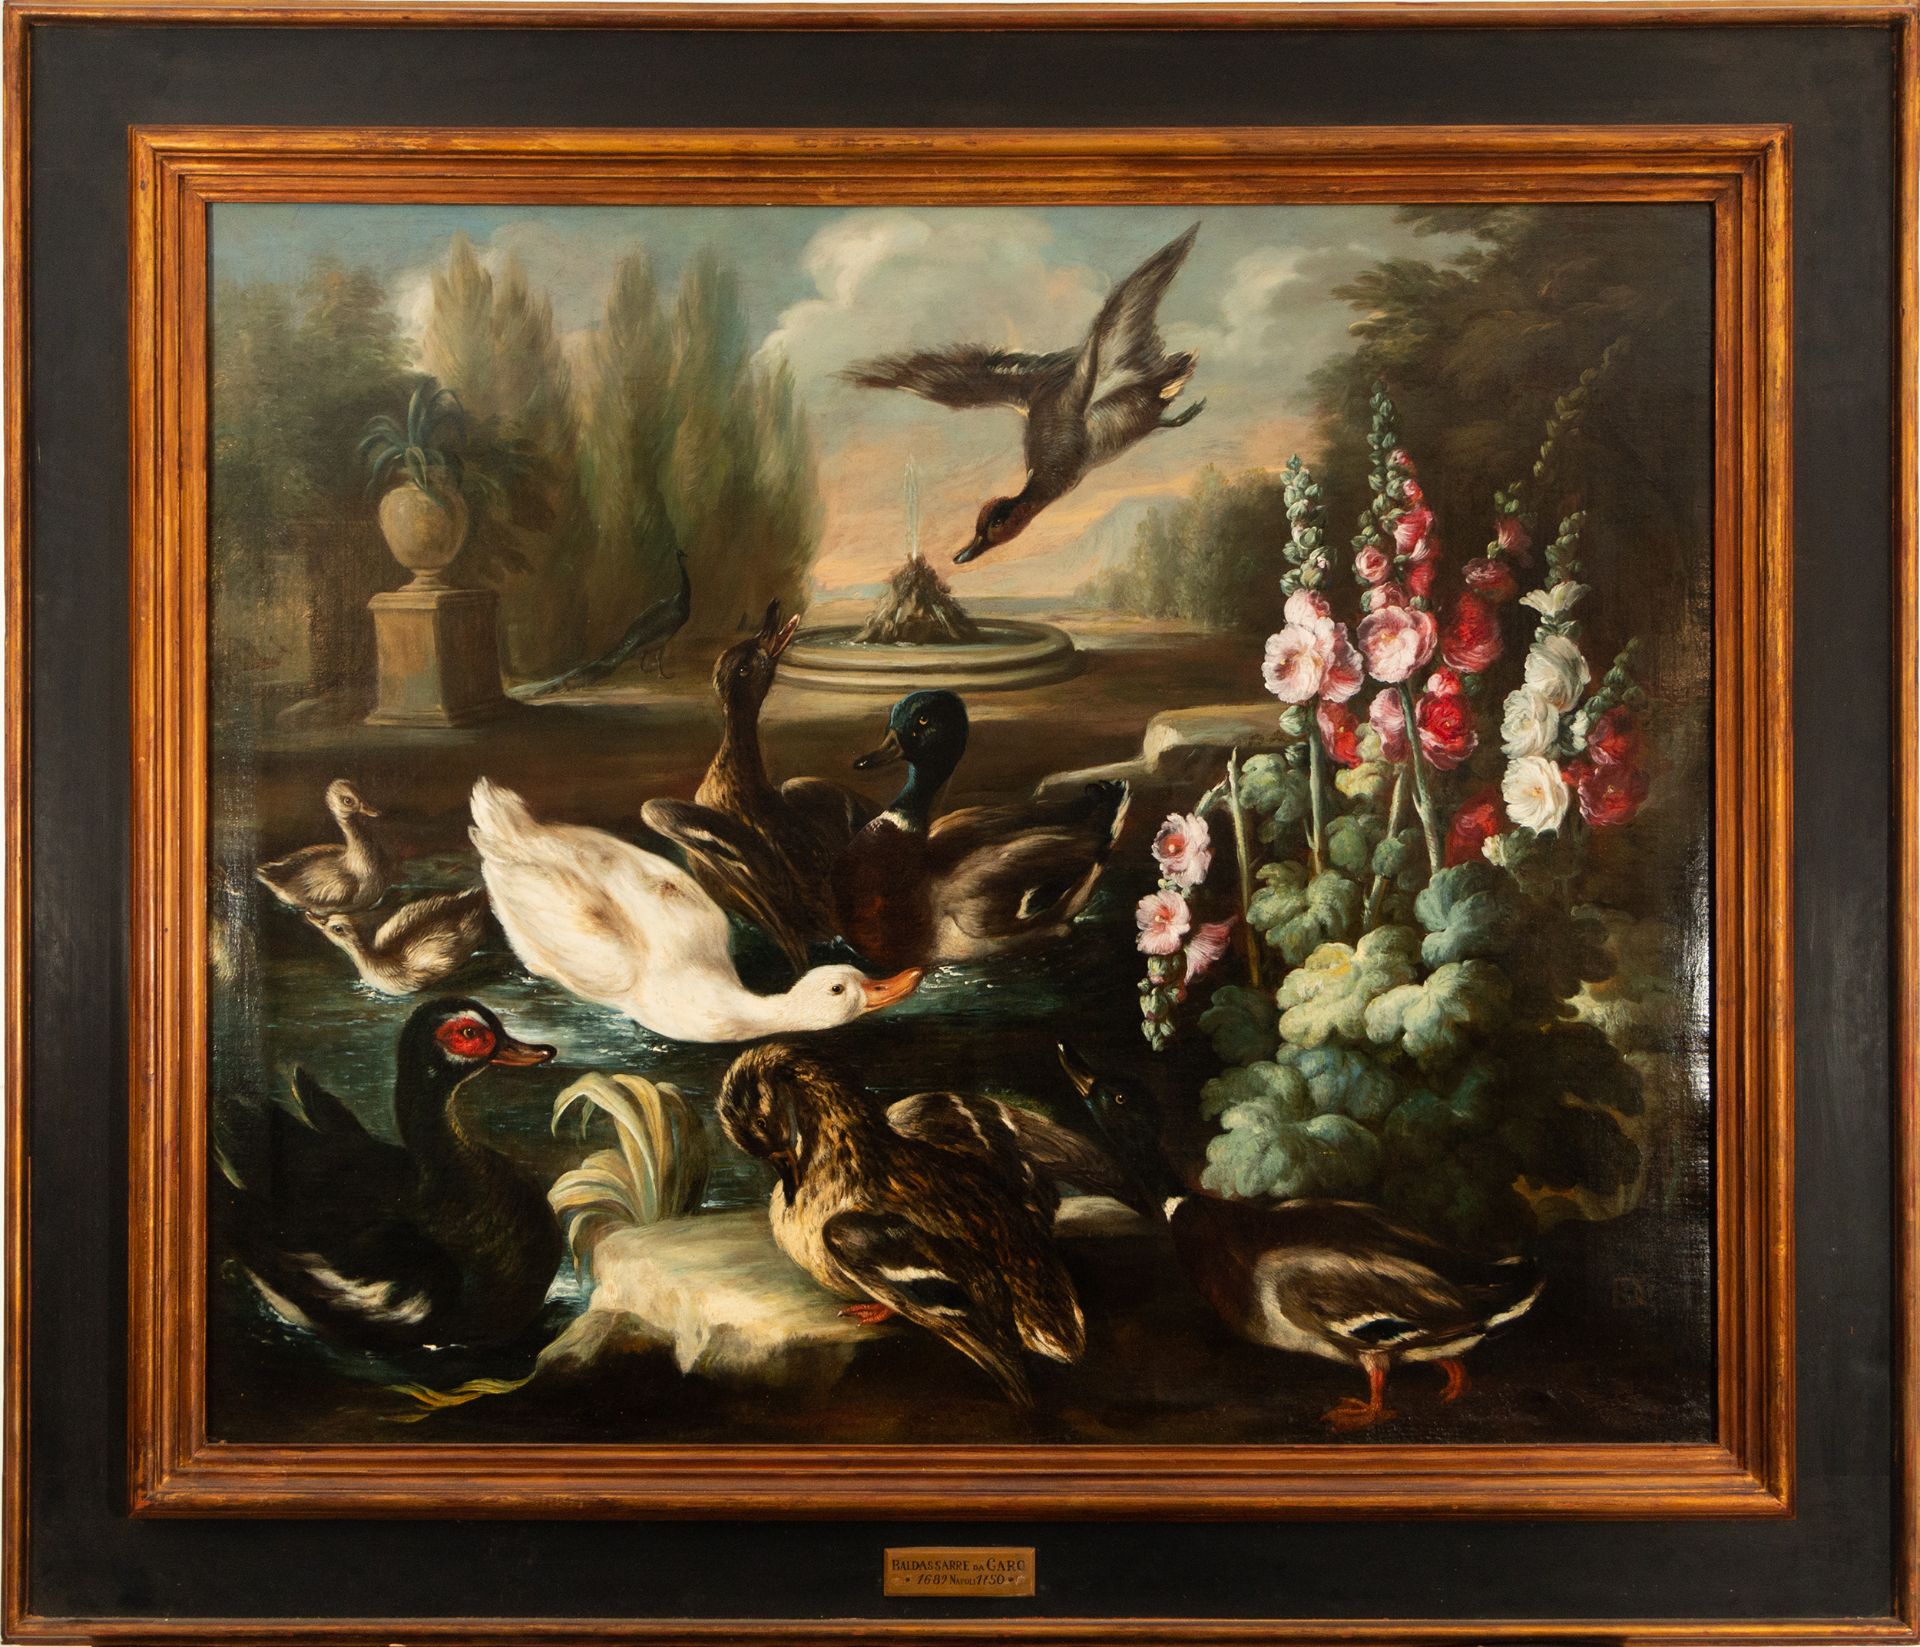 Large Pair of Still Lifes with Flowers and Birds in a Garden, 18th century Neapolitan school, Circle - Image 2 of 17